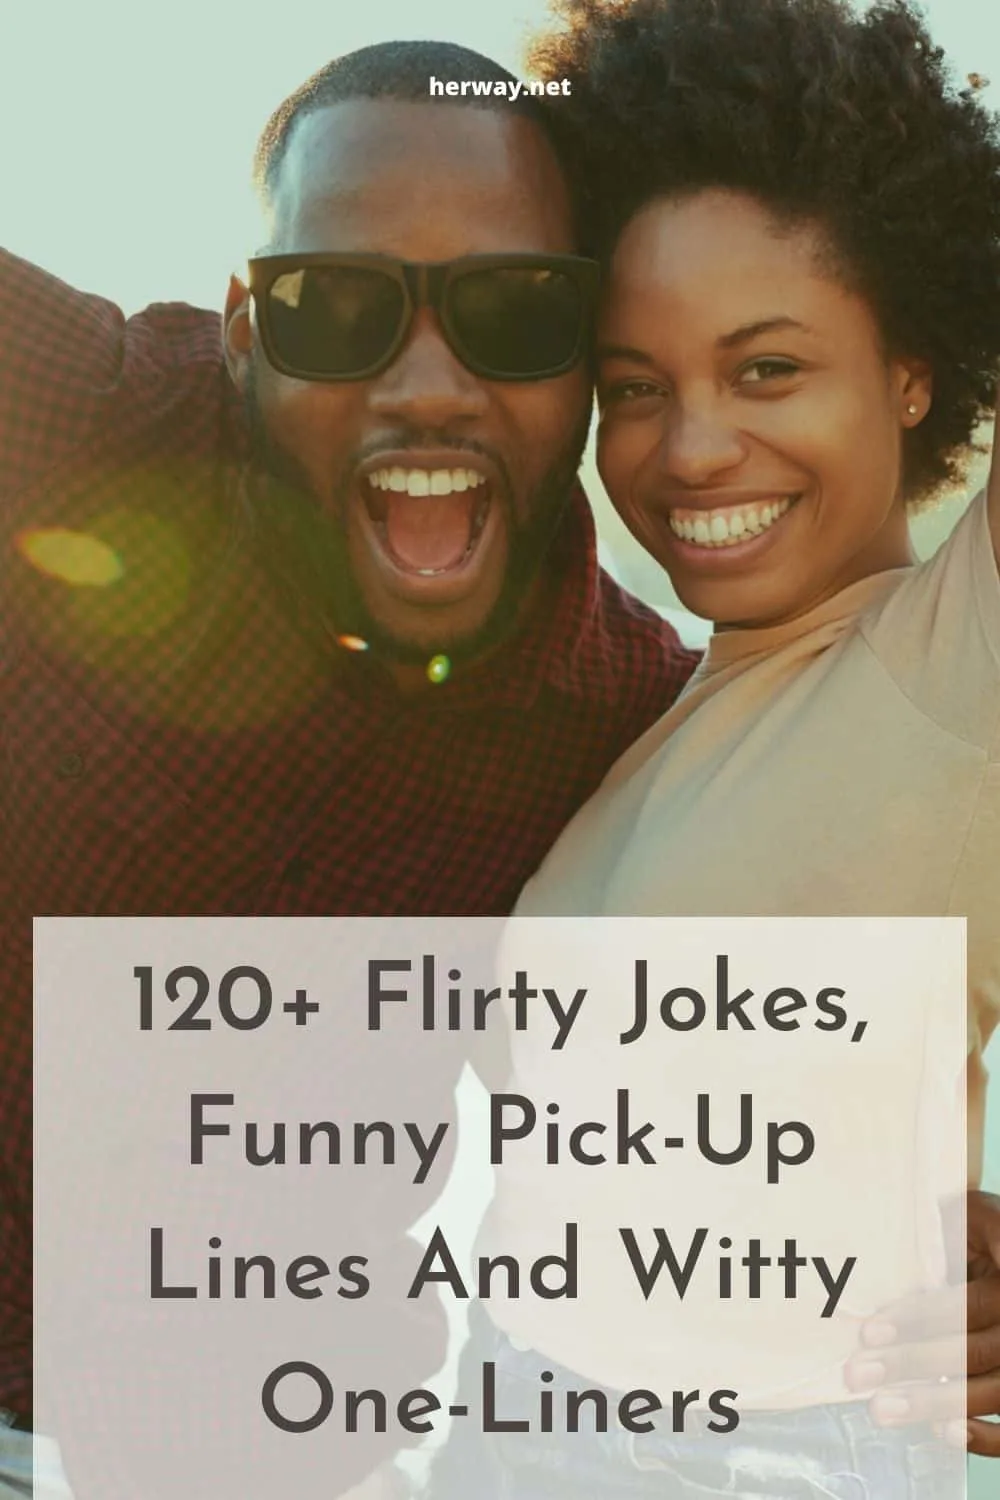 120+ Flirty Jokes, Funny Pick-Up Lines And Witty One-Liners